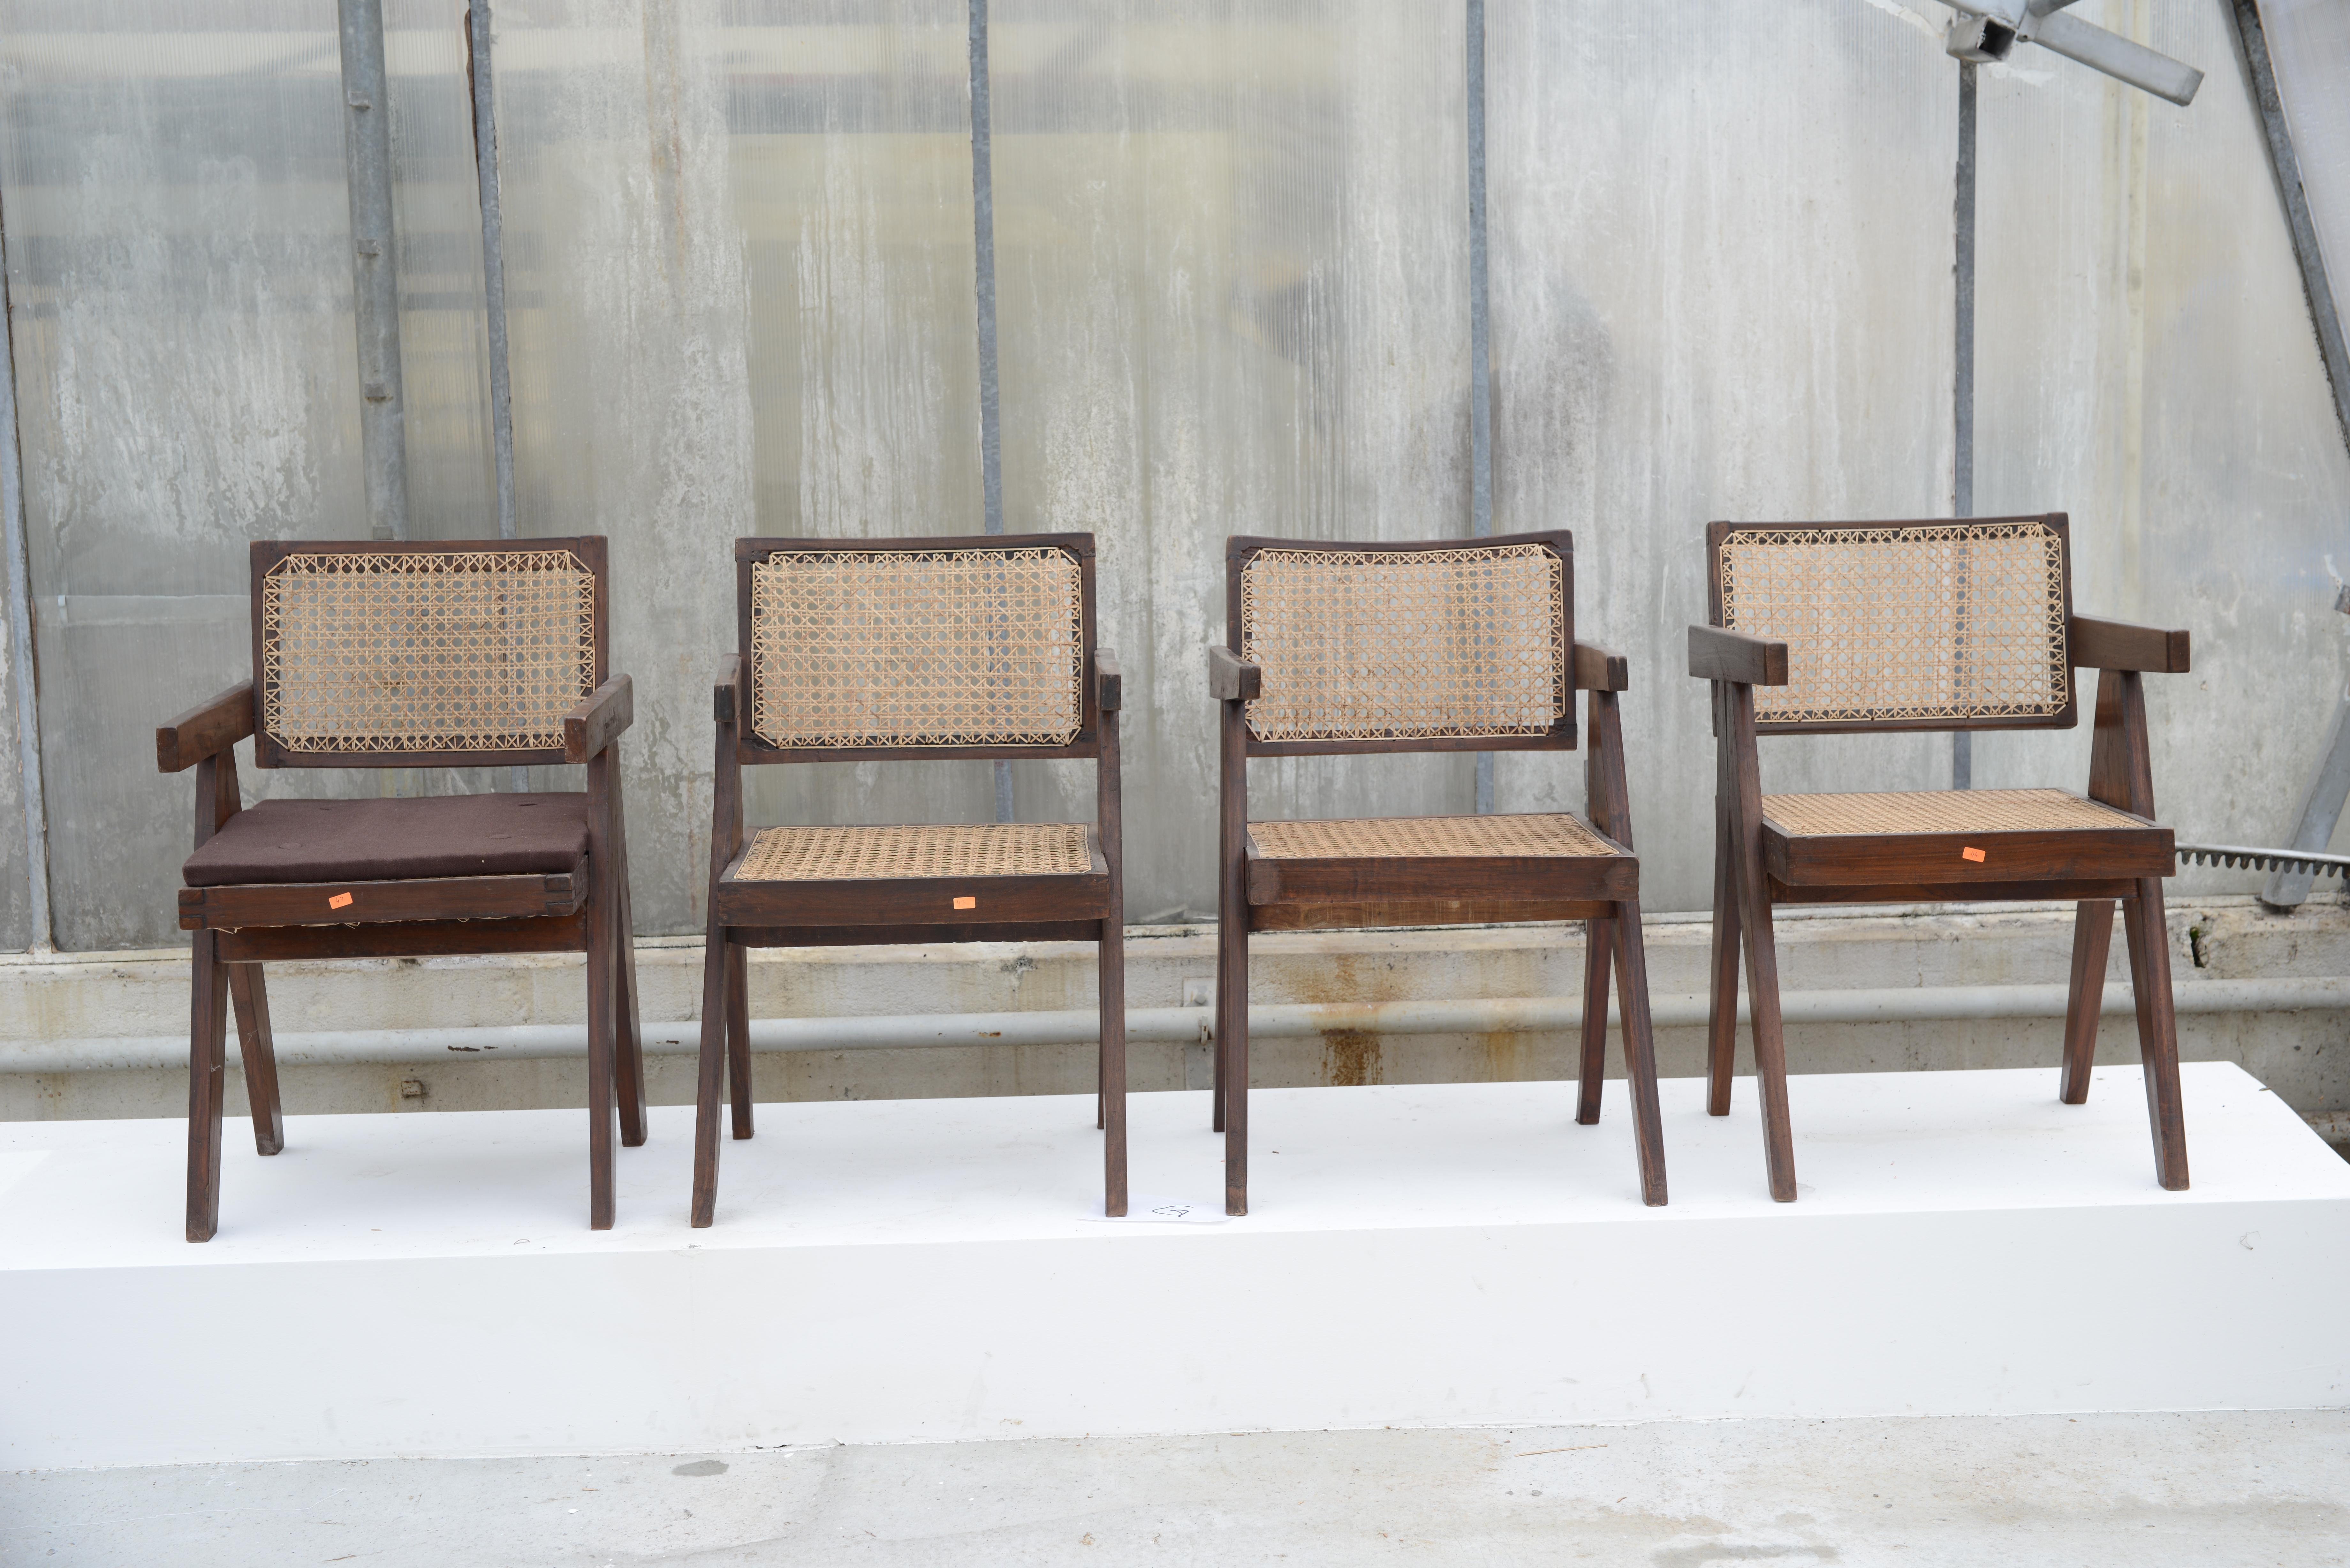 Indian Pierre Jeanneret Set of 4 Chairs / Authentic Mid-Century Modern PJ-SI-28-A